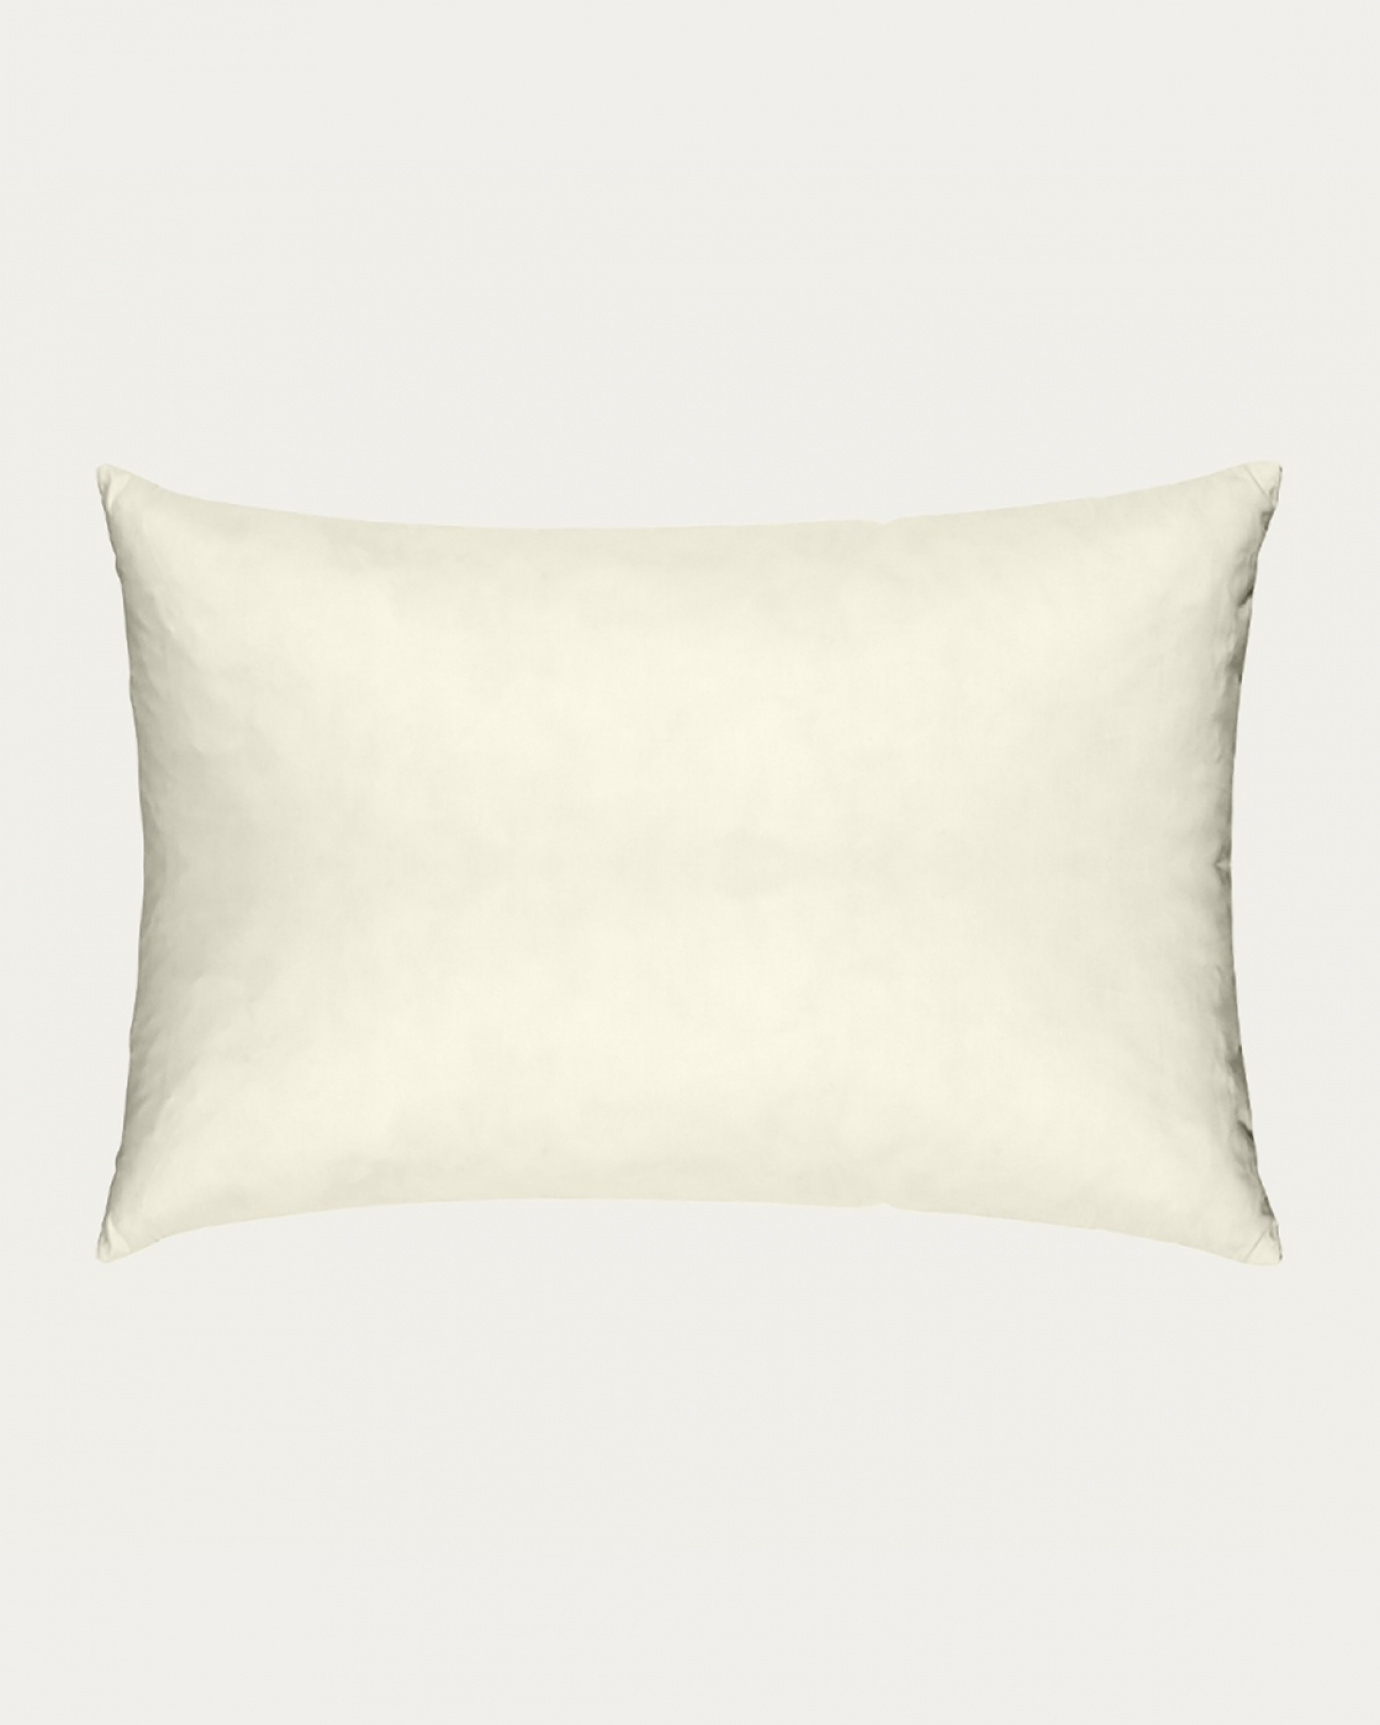 Product image cotton beige FEATHER cushion insert made of cotton with feather filling from LINUM DESIGN. Size 40x60 cm.